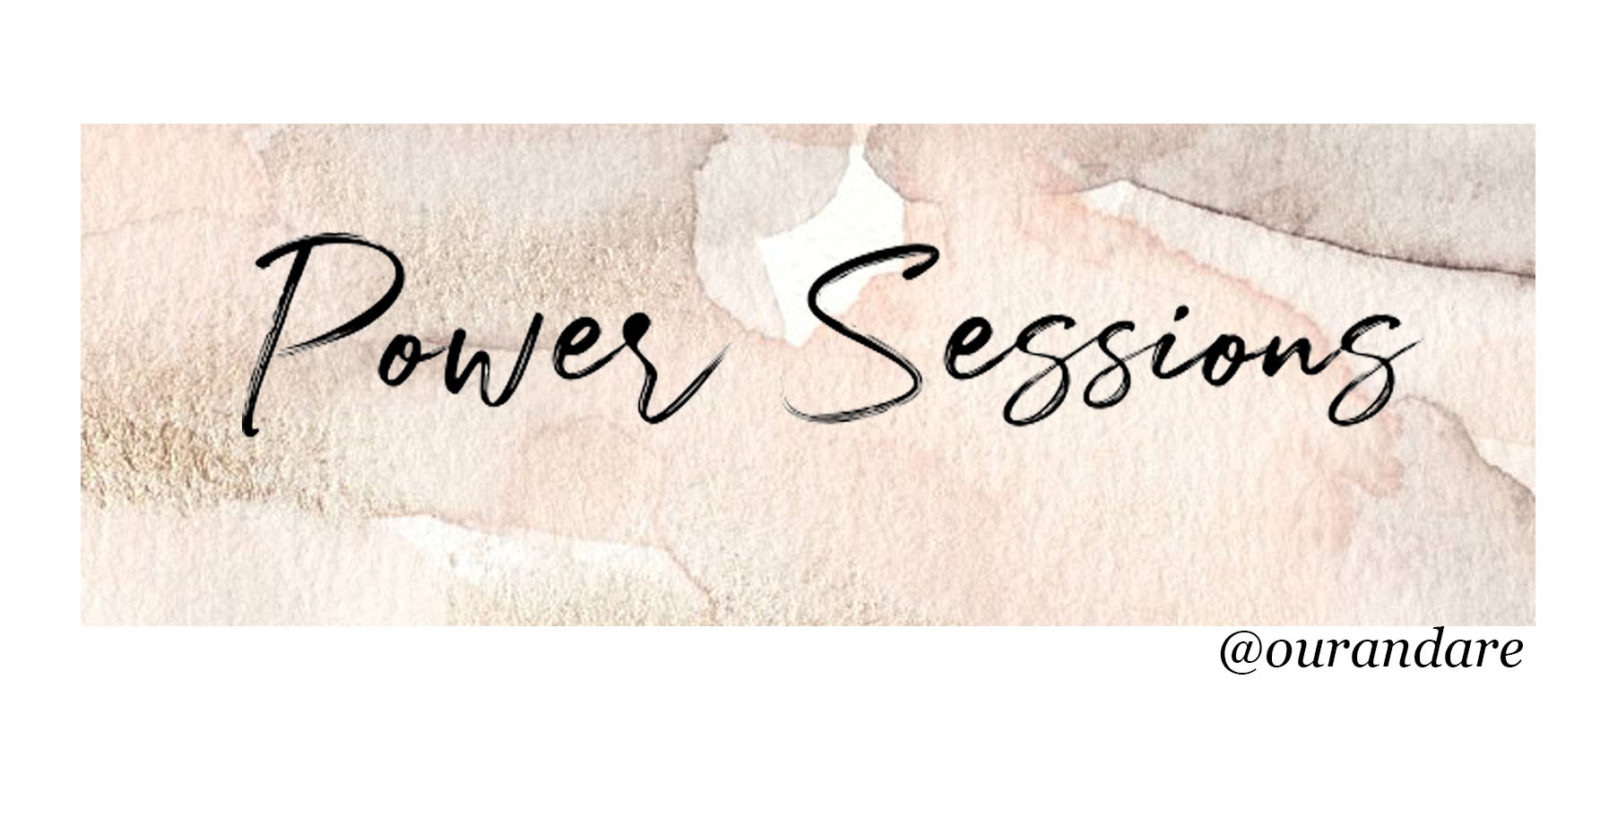 power sessions cropped